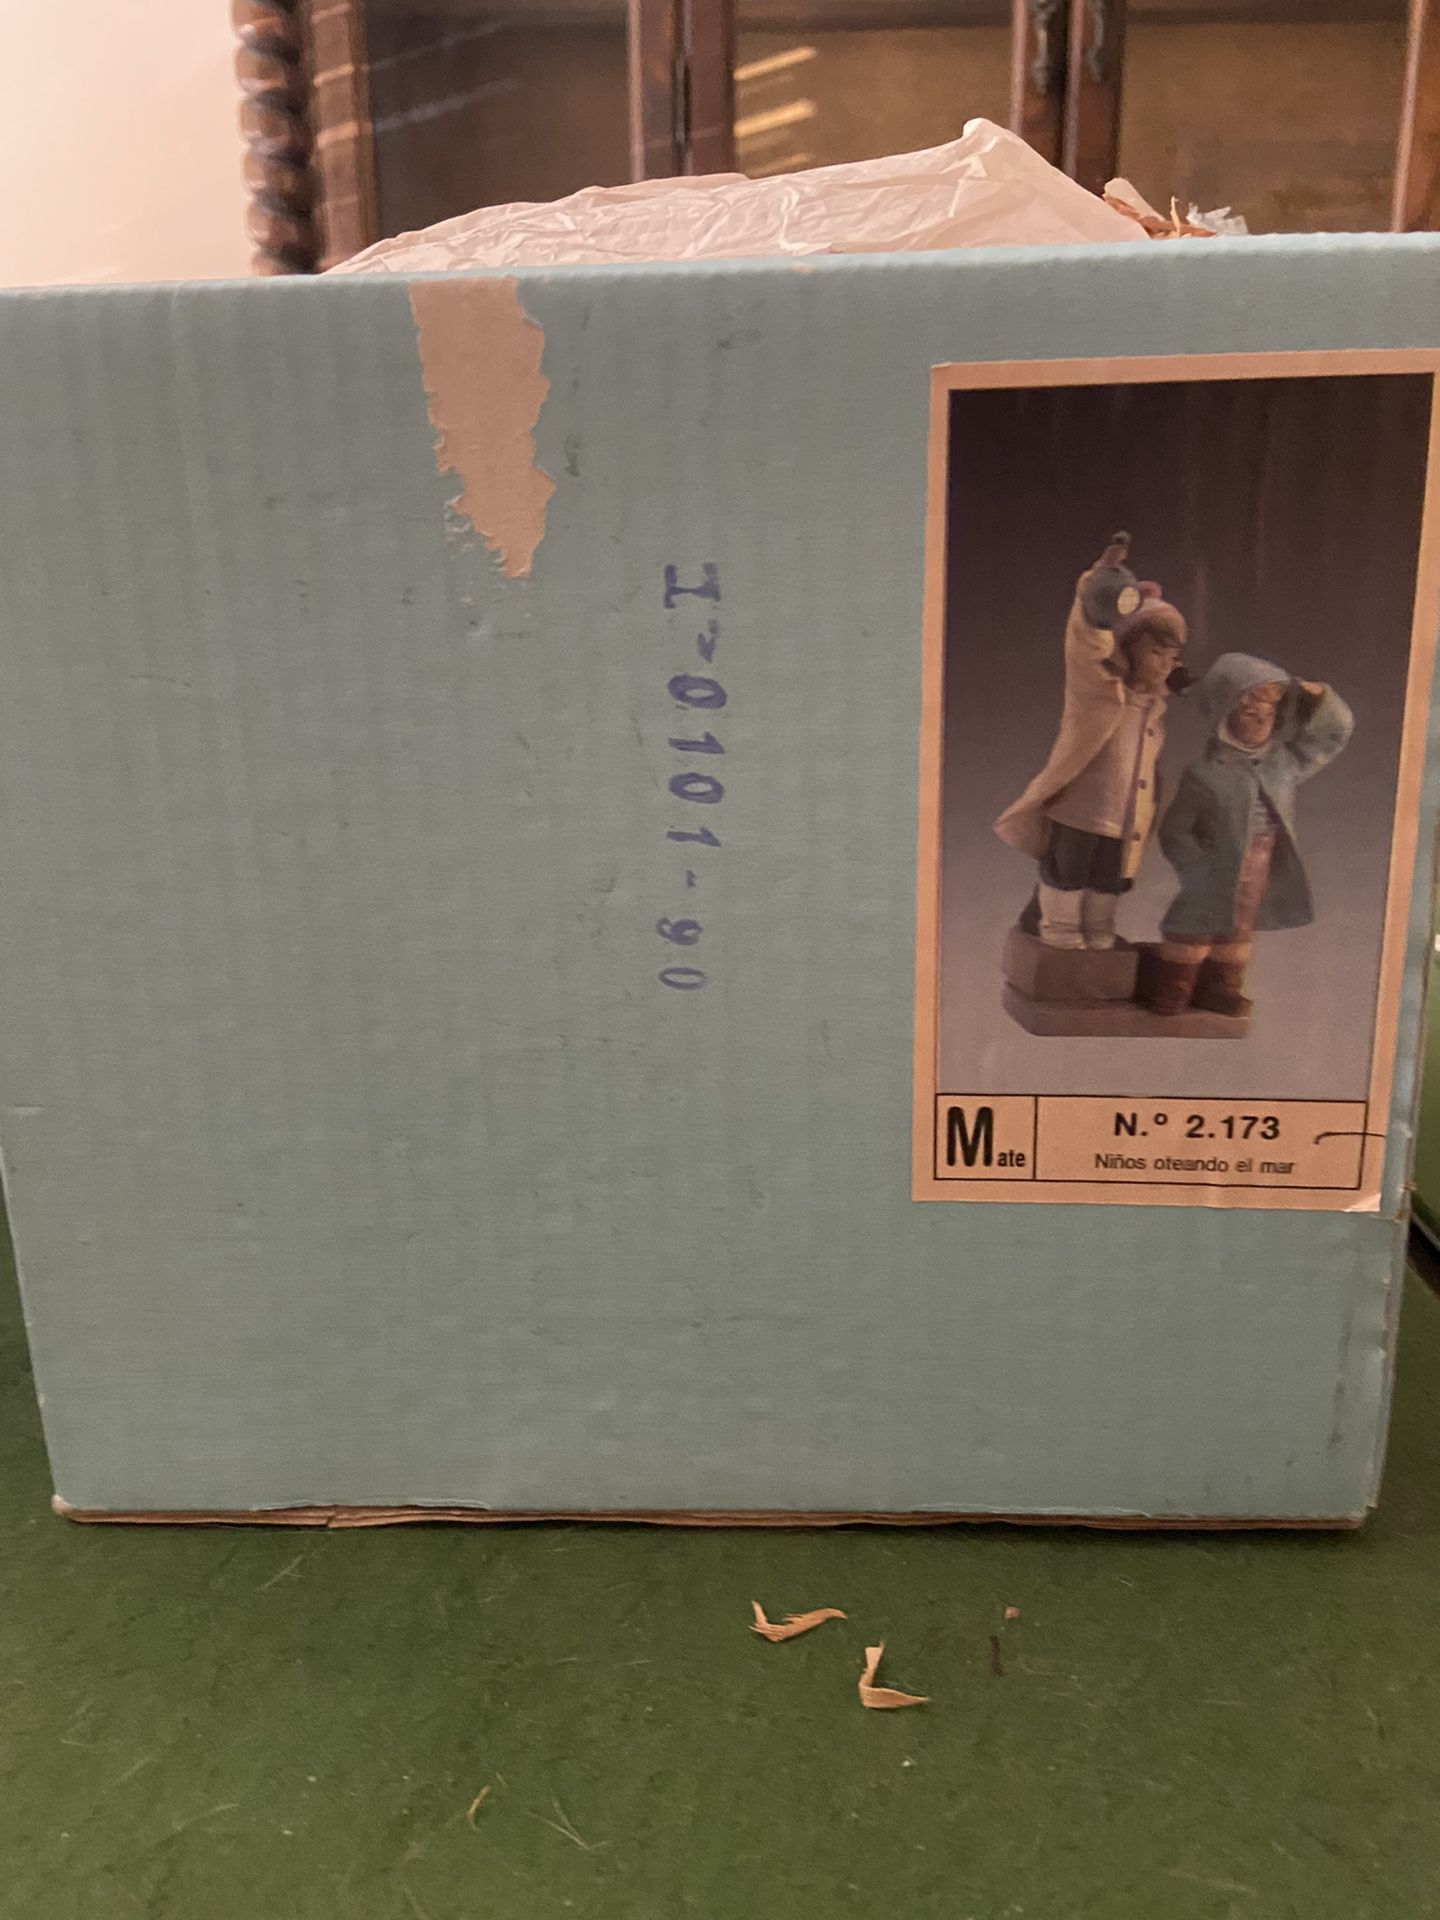 Lladro Ahoy There Figurine 